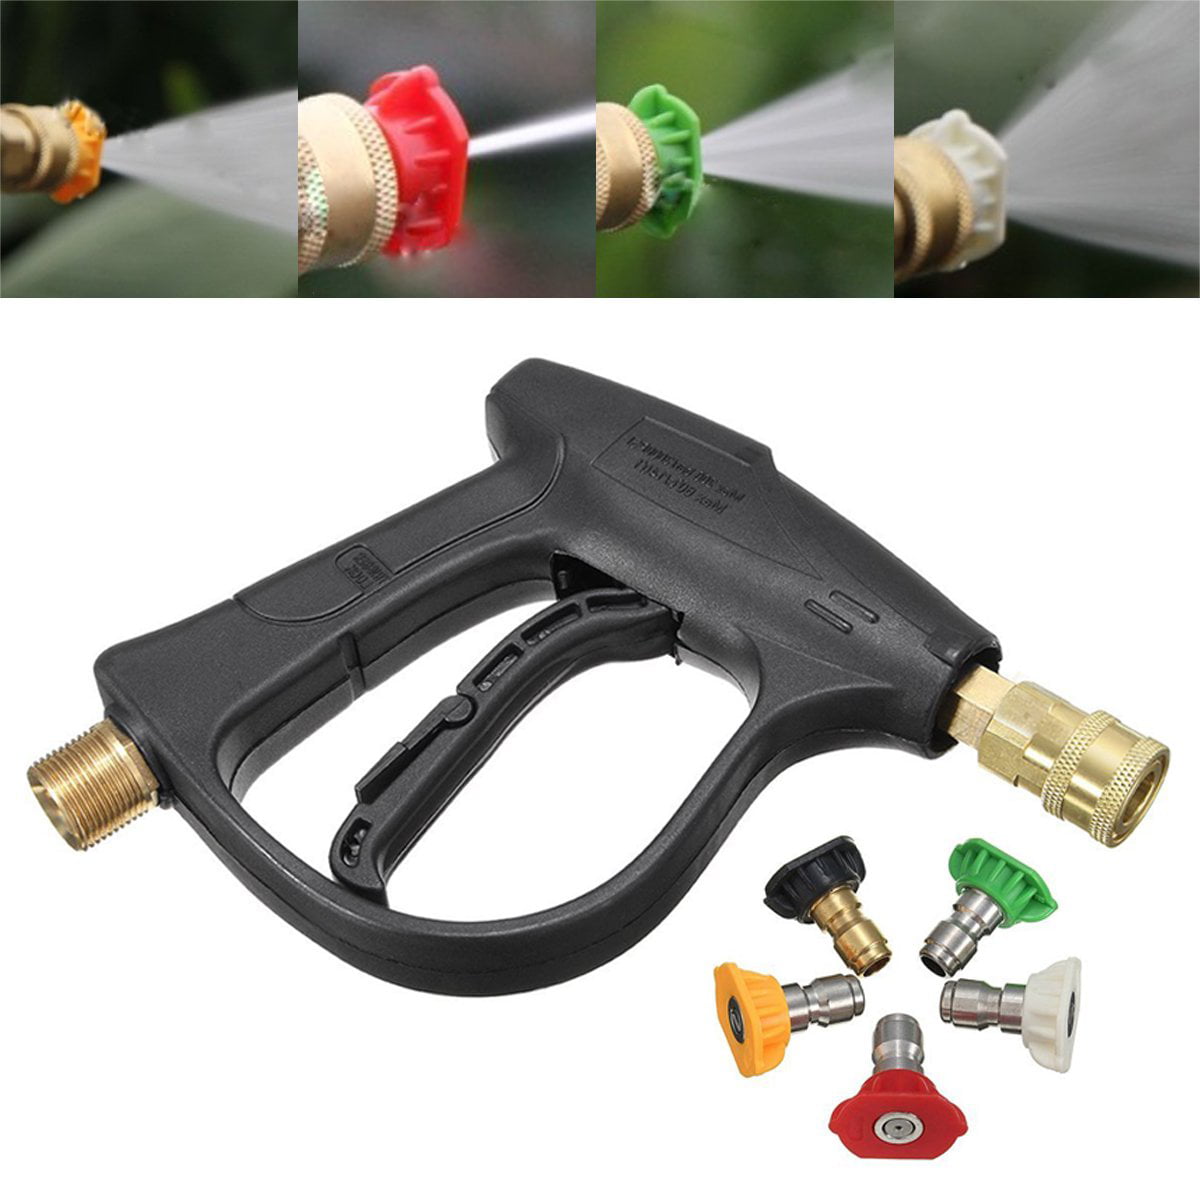 Dropship 1/4in High Pressure Car Washer Sprayer 3000PSI Pressure Washer Gun  Car Foam Sprayer With Jet Wand 5 Nozzle Tips M22-14 Connector to Sell  Online at a Lower Price